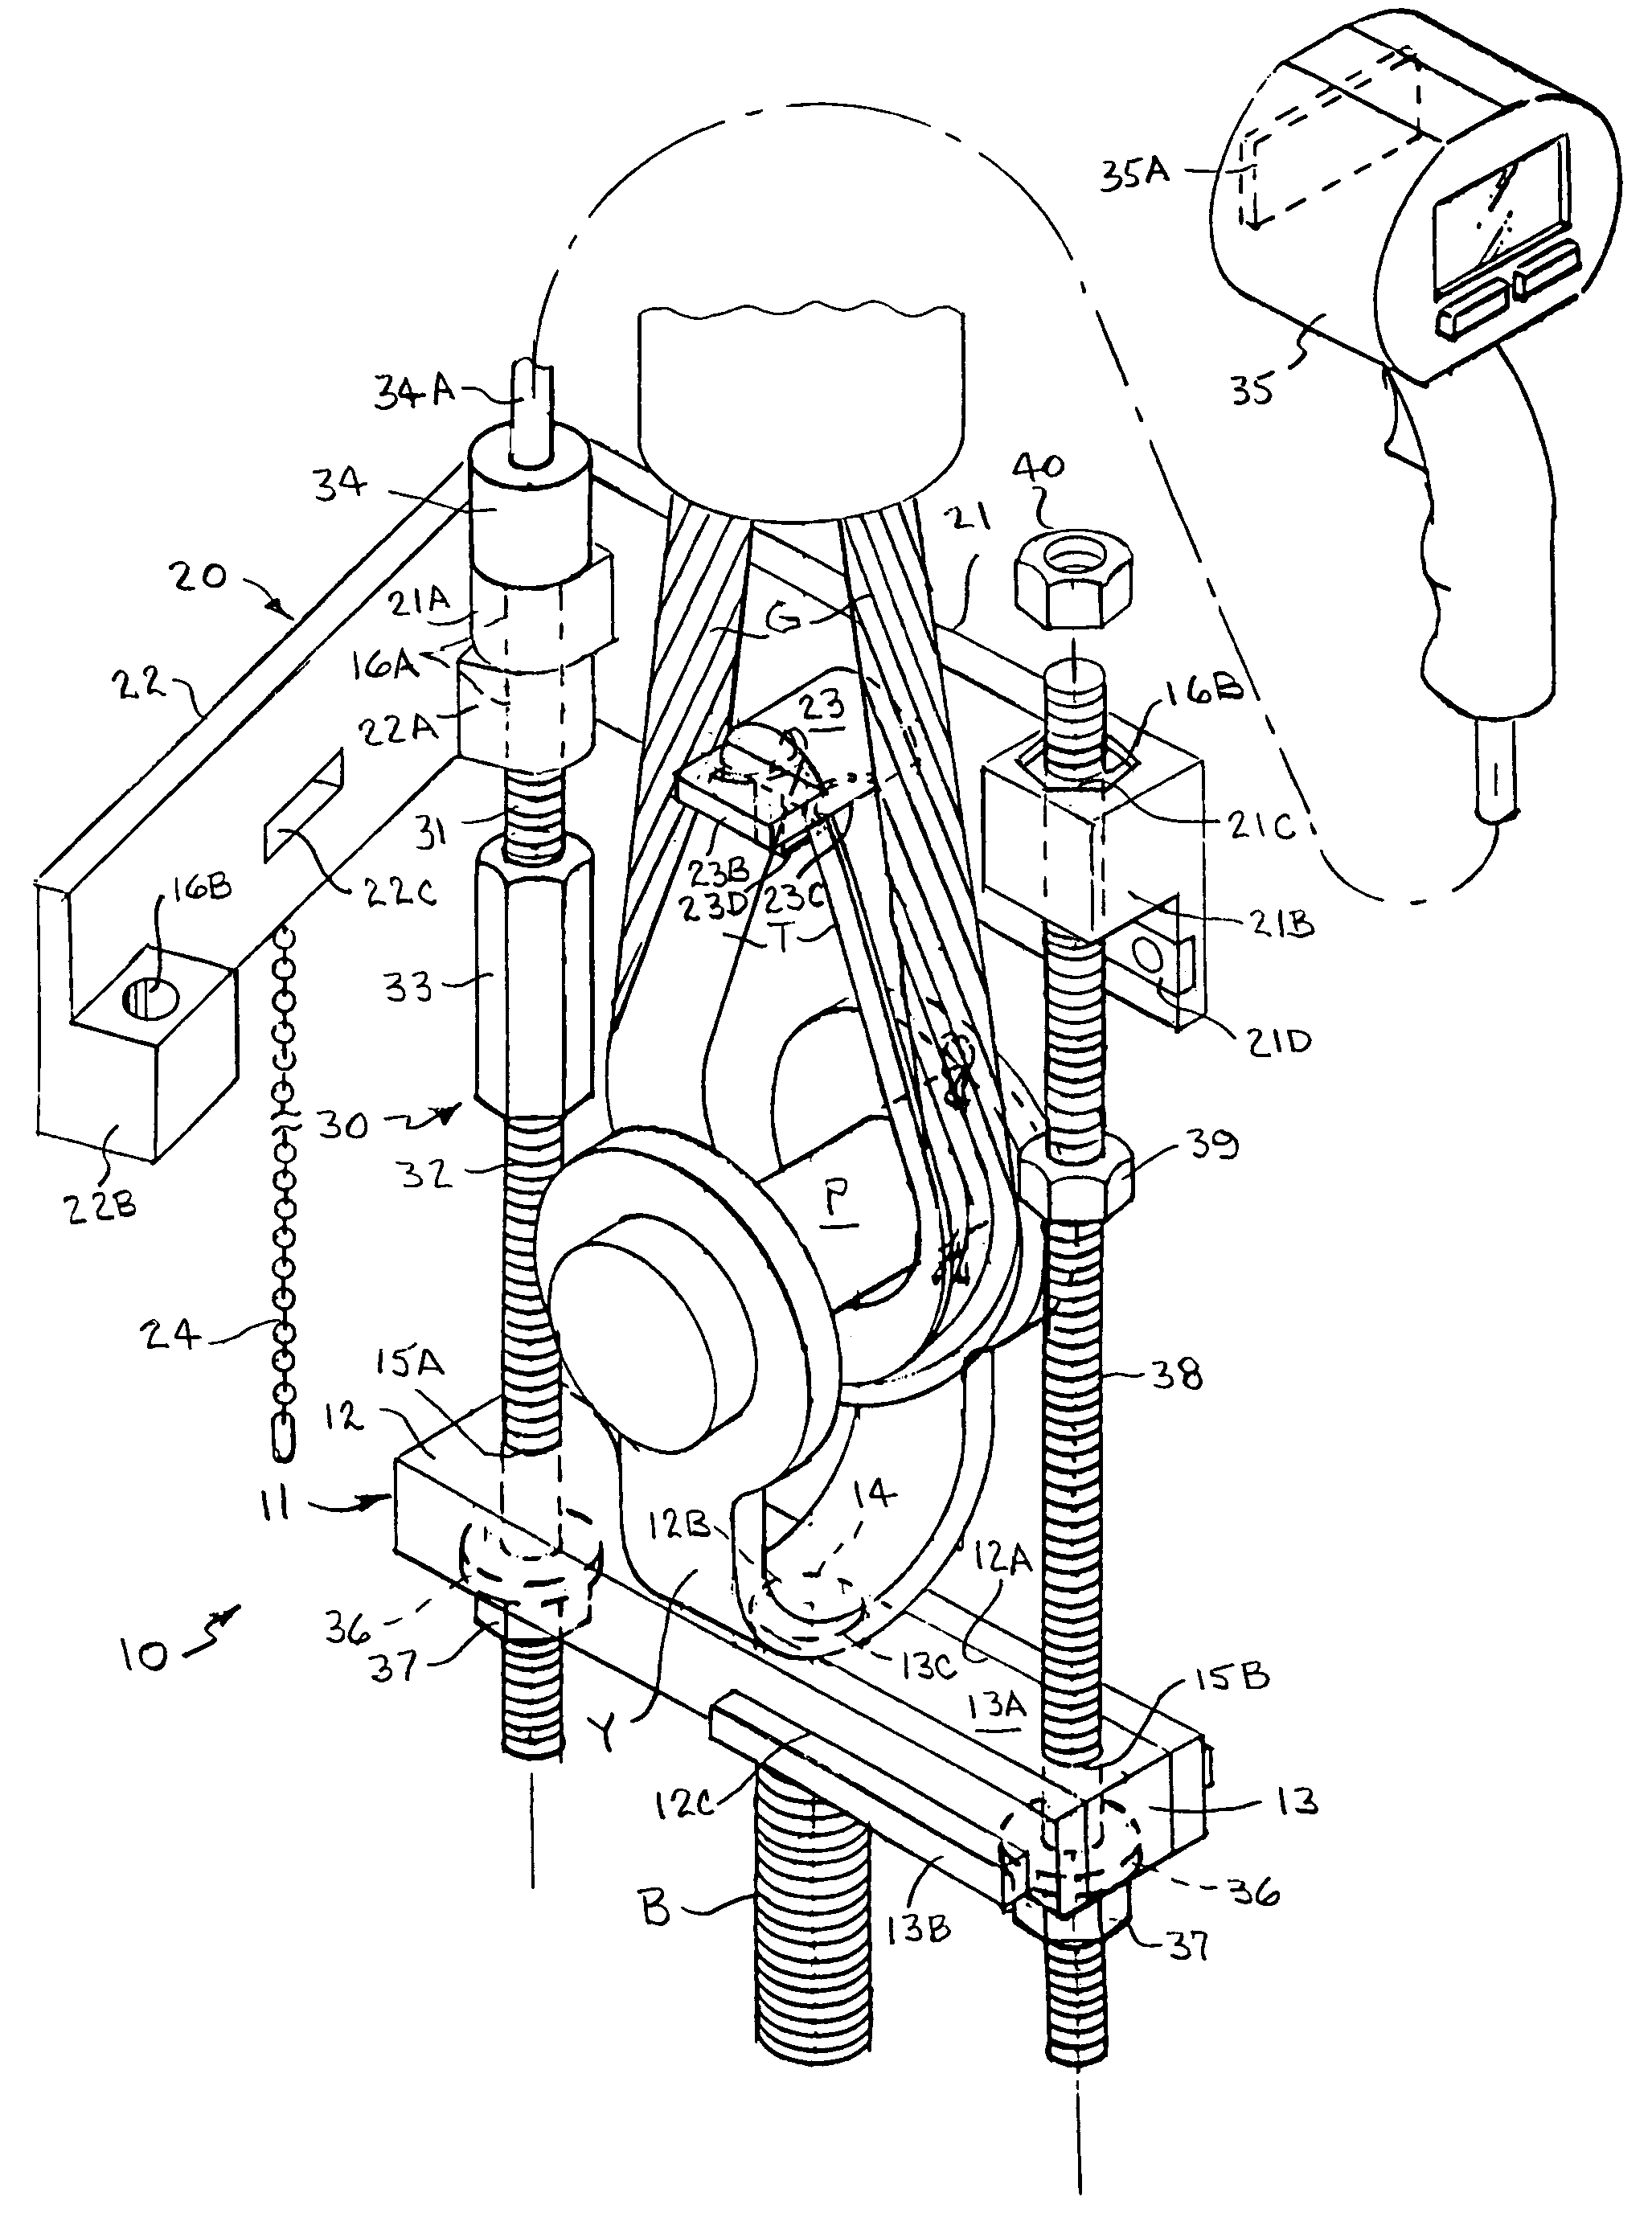 Apparatus and method for measuring tension in guy wires